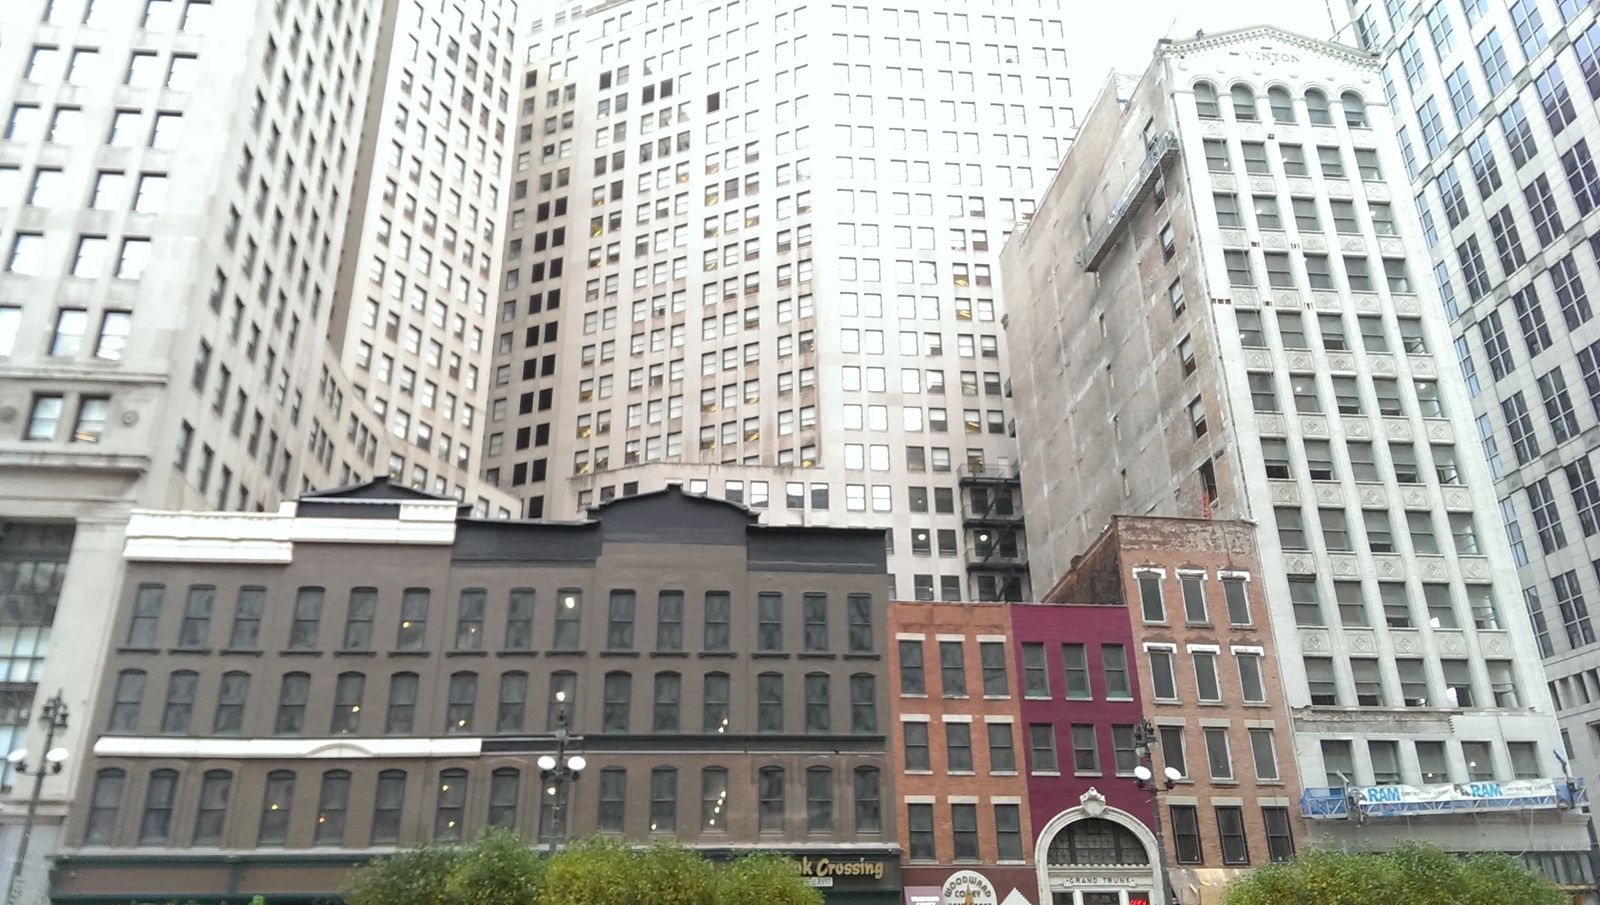 Photo of small buildings dwarfed by nearby skyscrapers in Detroit, Michigan